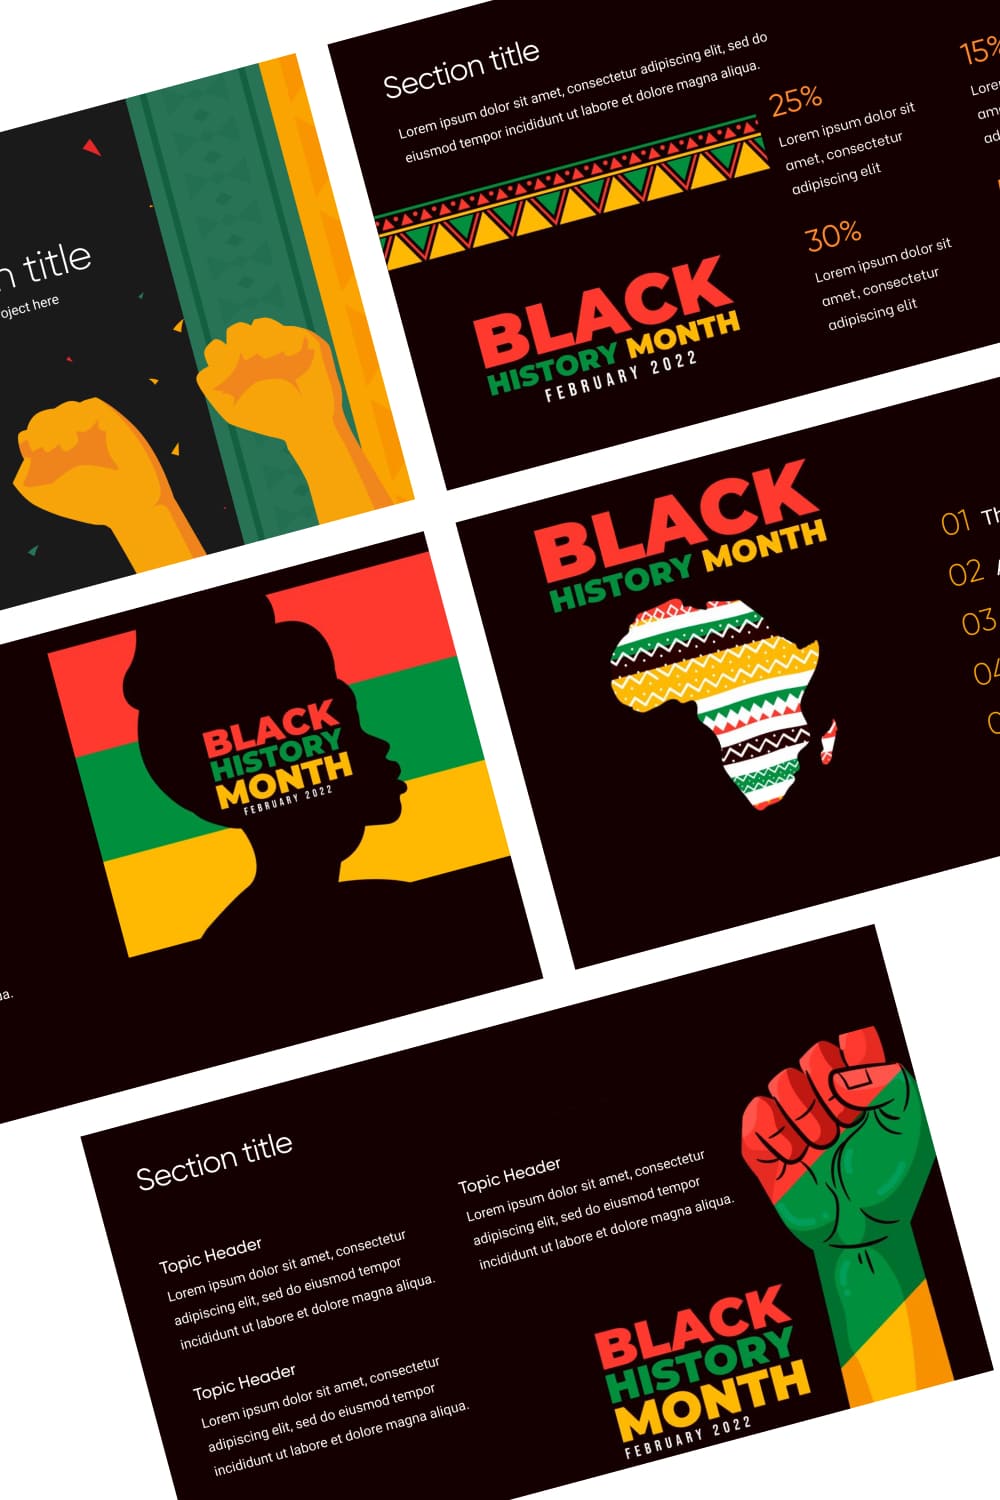 Pinterest of Black History Powerpoint Template.